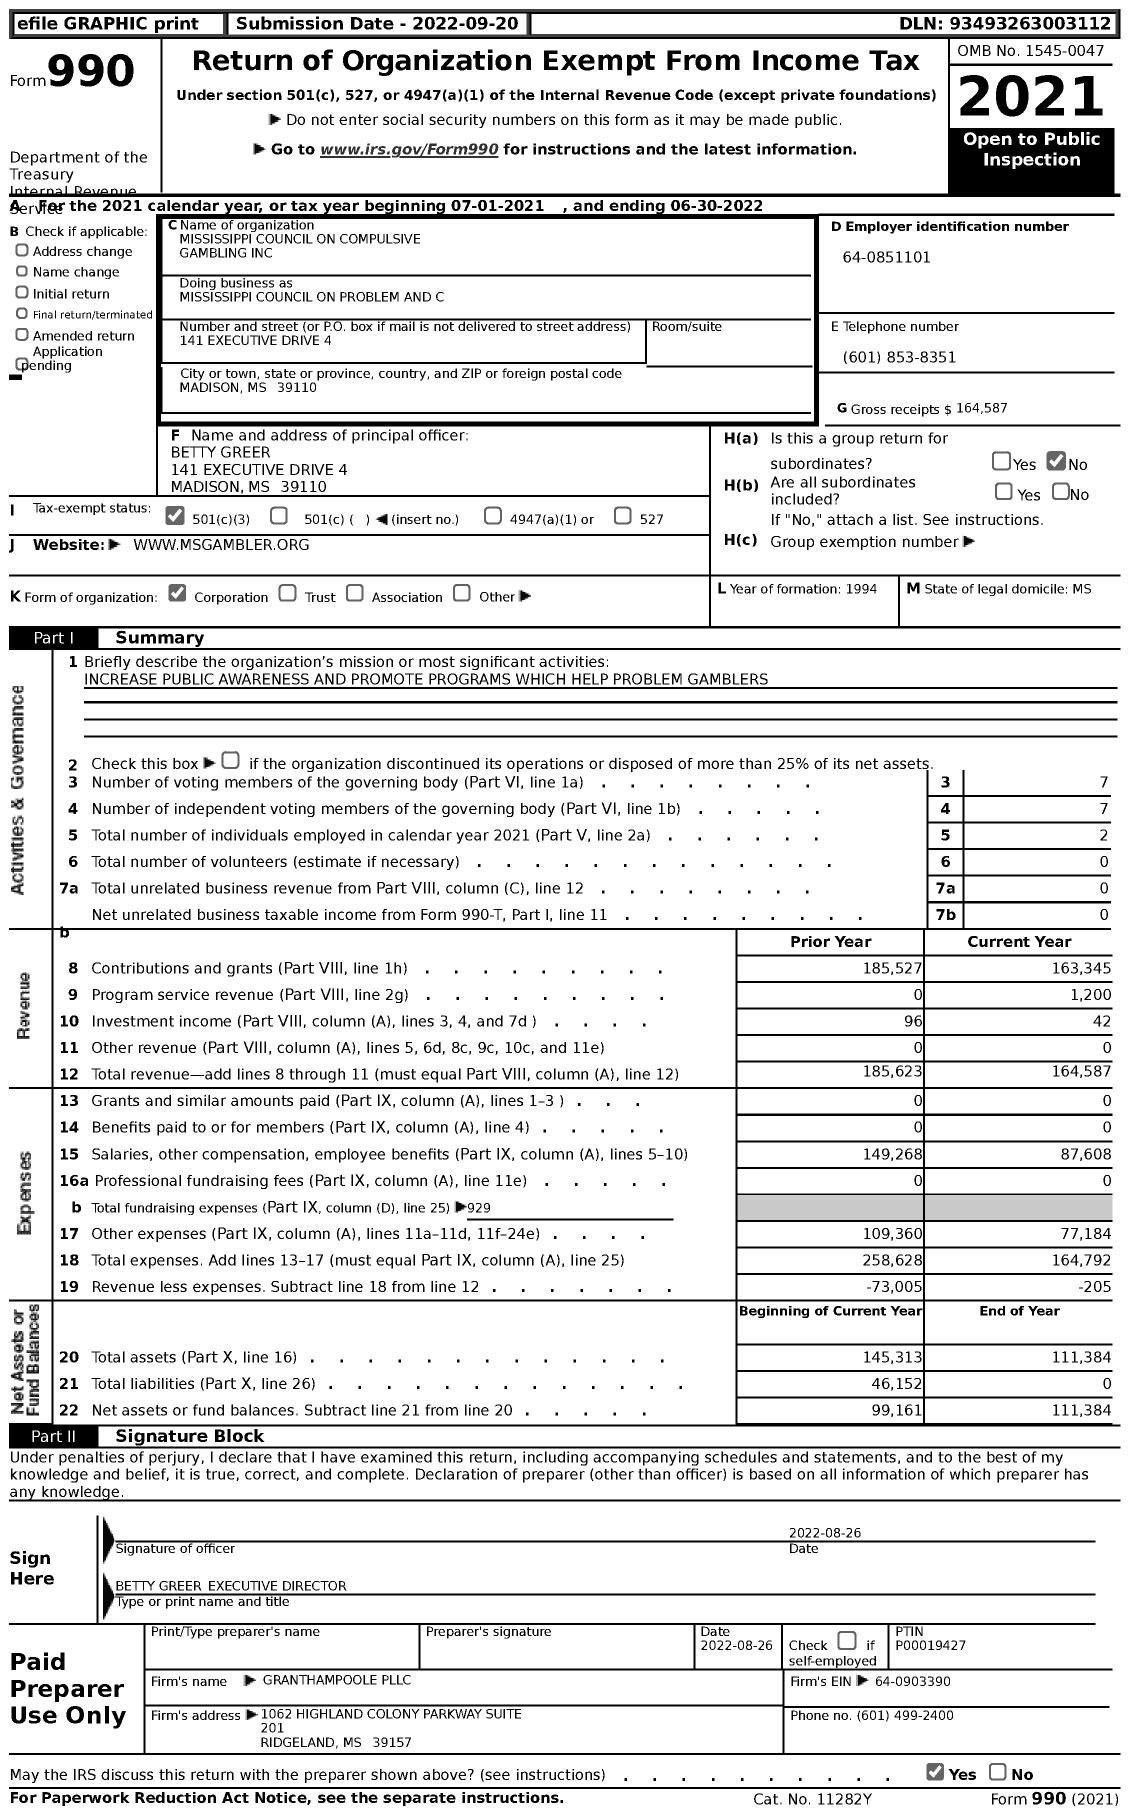 Image of first page of 2021 Form 990 for Mississippi Council on Problem and C